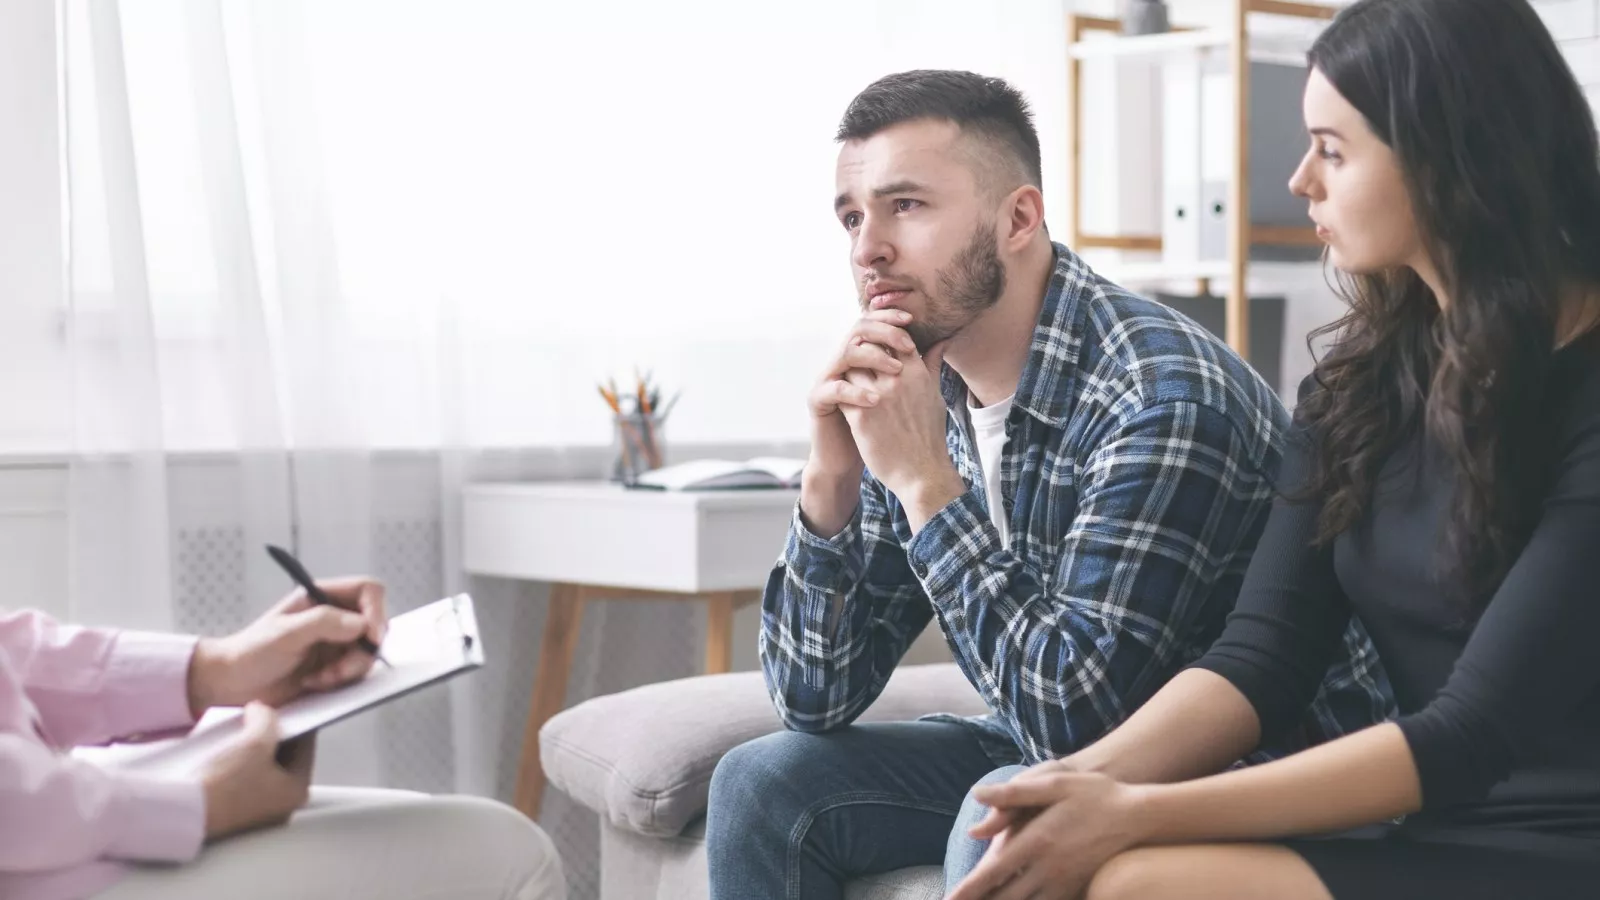 Couples Therapists Say Viral Relationship Tests Can Hurt Partner